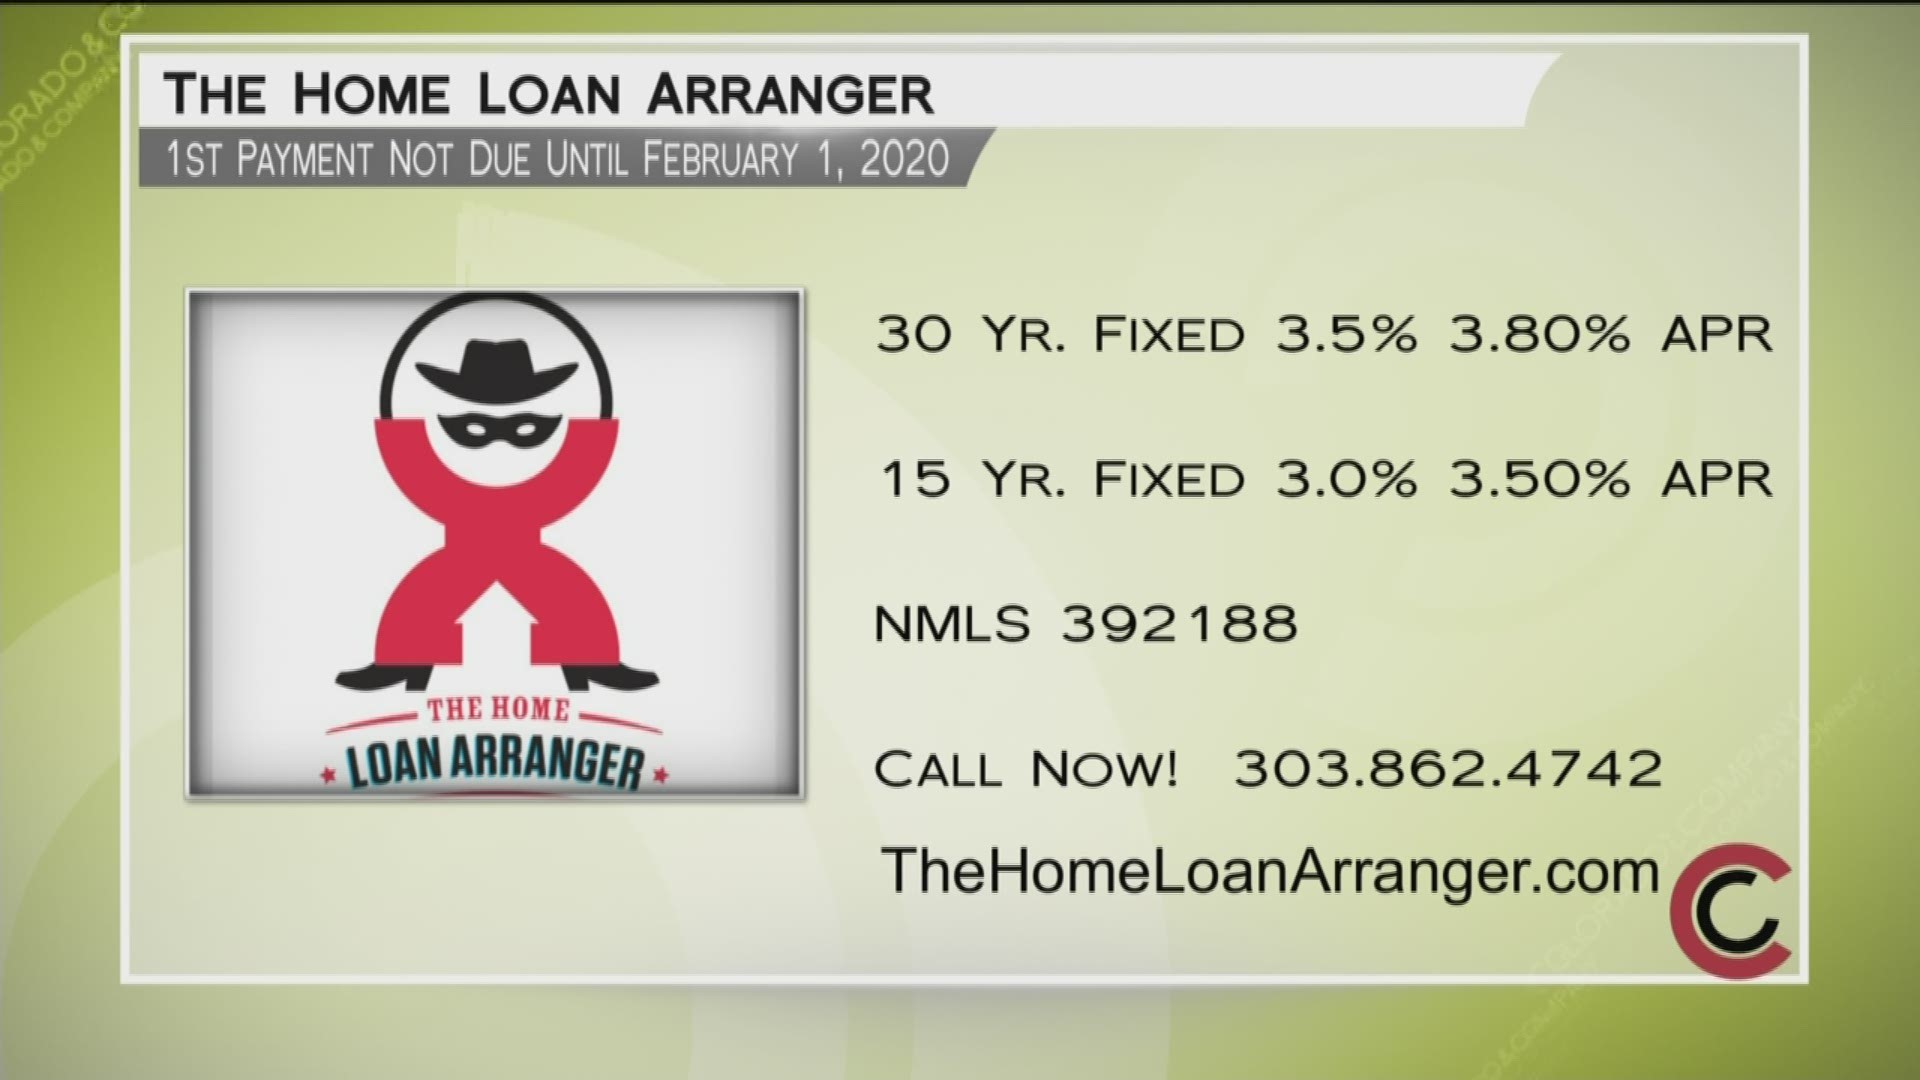 Call the Home Loan Arranger and save money. Your first payment won't be due until February! Call 303.862.4742 or visit www.TheHomeLoanArranger.com for more info.